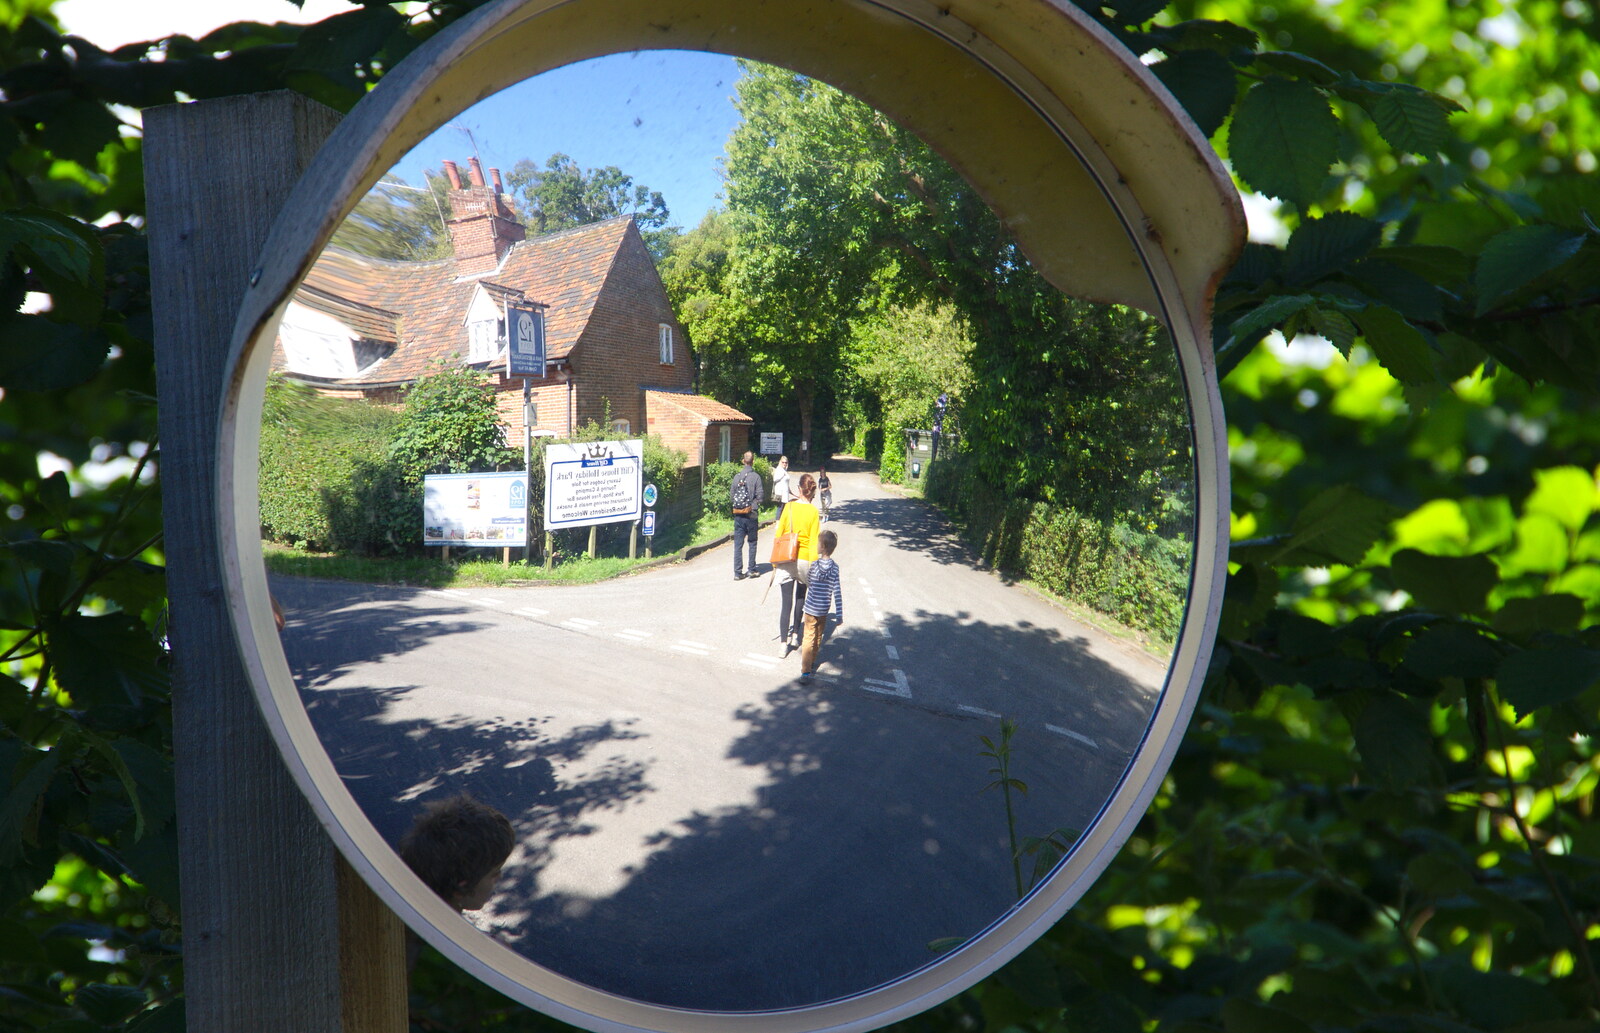 The gang reflected in a convex mirror from Cliff House Camping, Dunwich, Suffolk - 15th June 2019